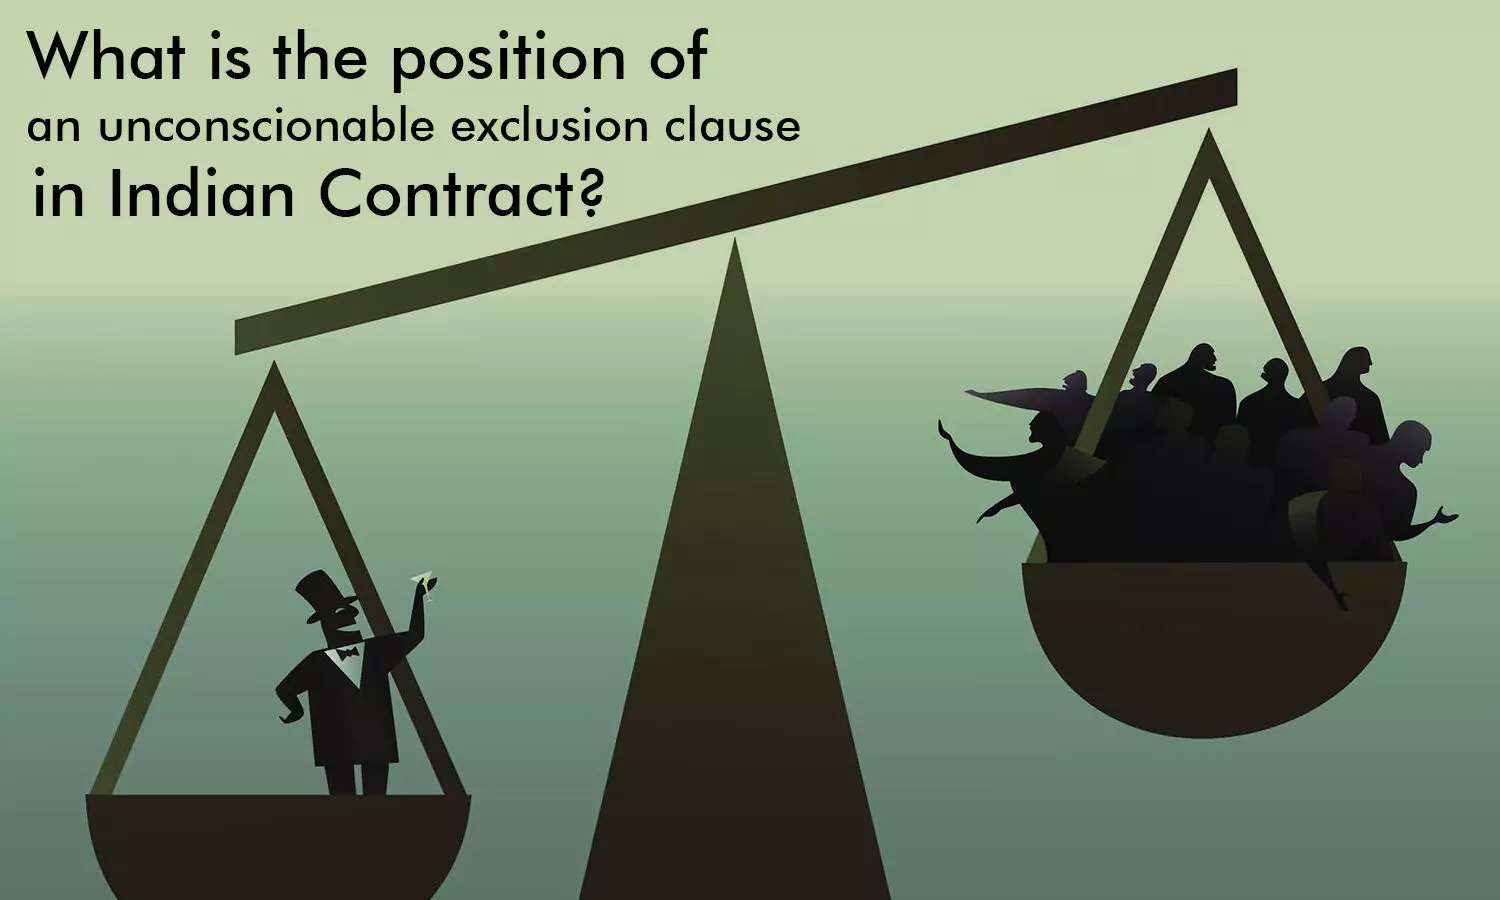 What is the position of an unconscionable exclusion clause in Indian Contract?